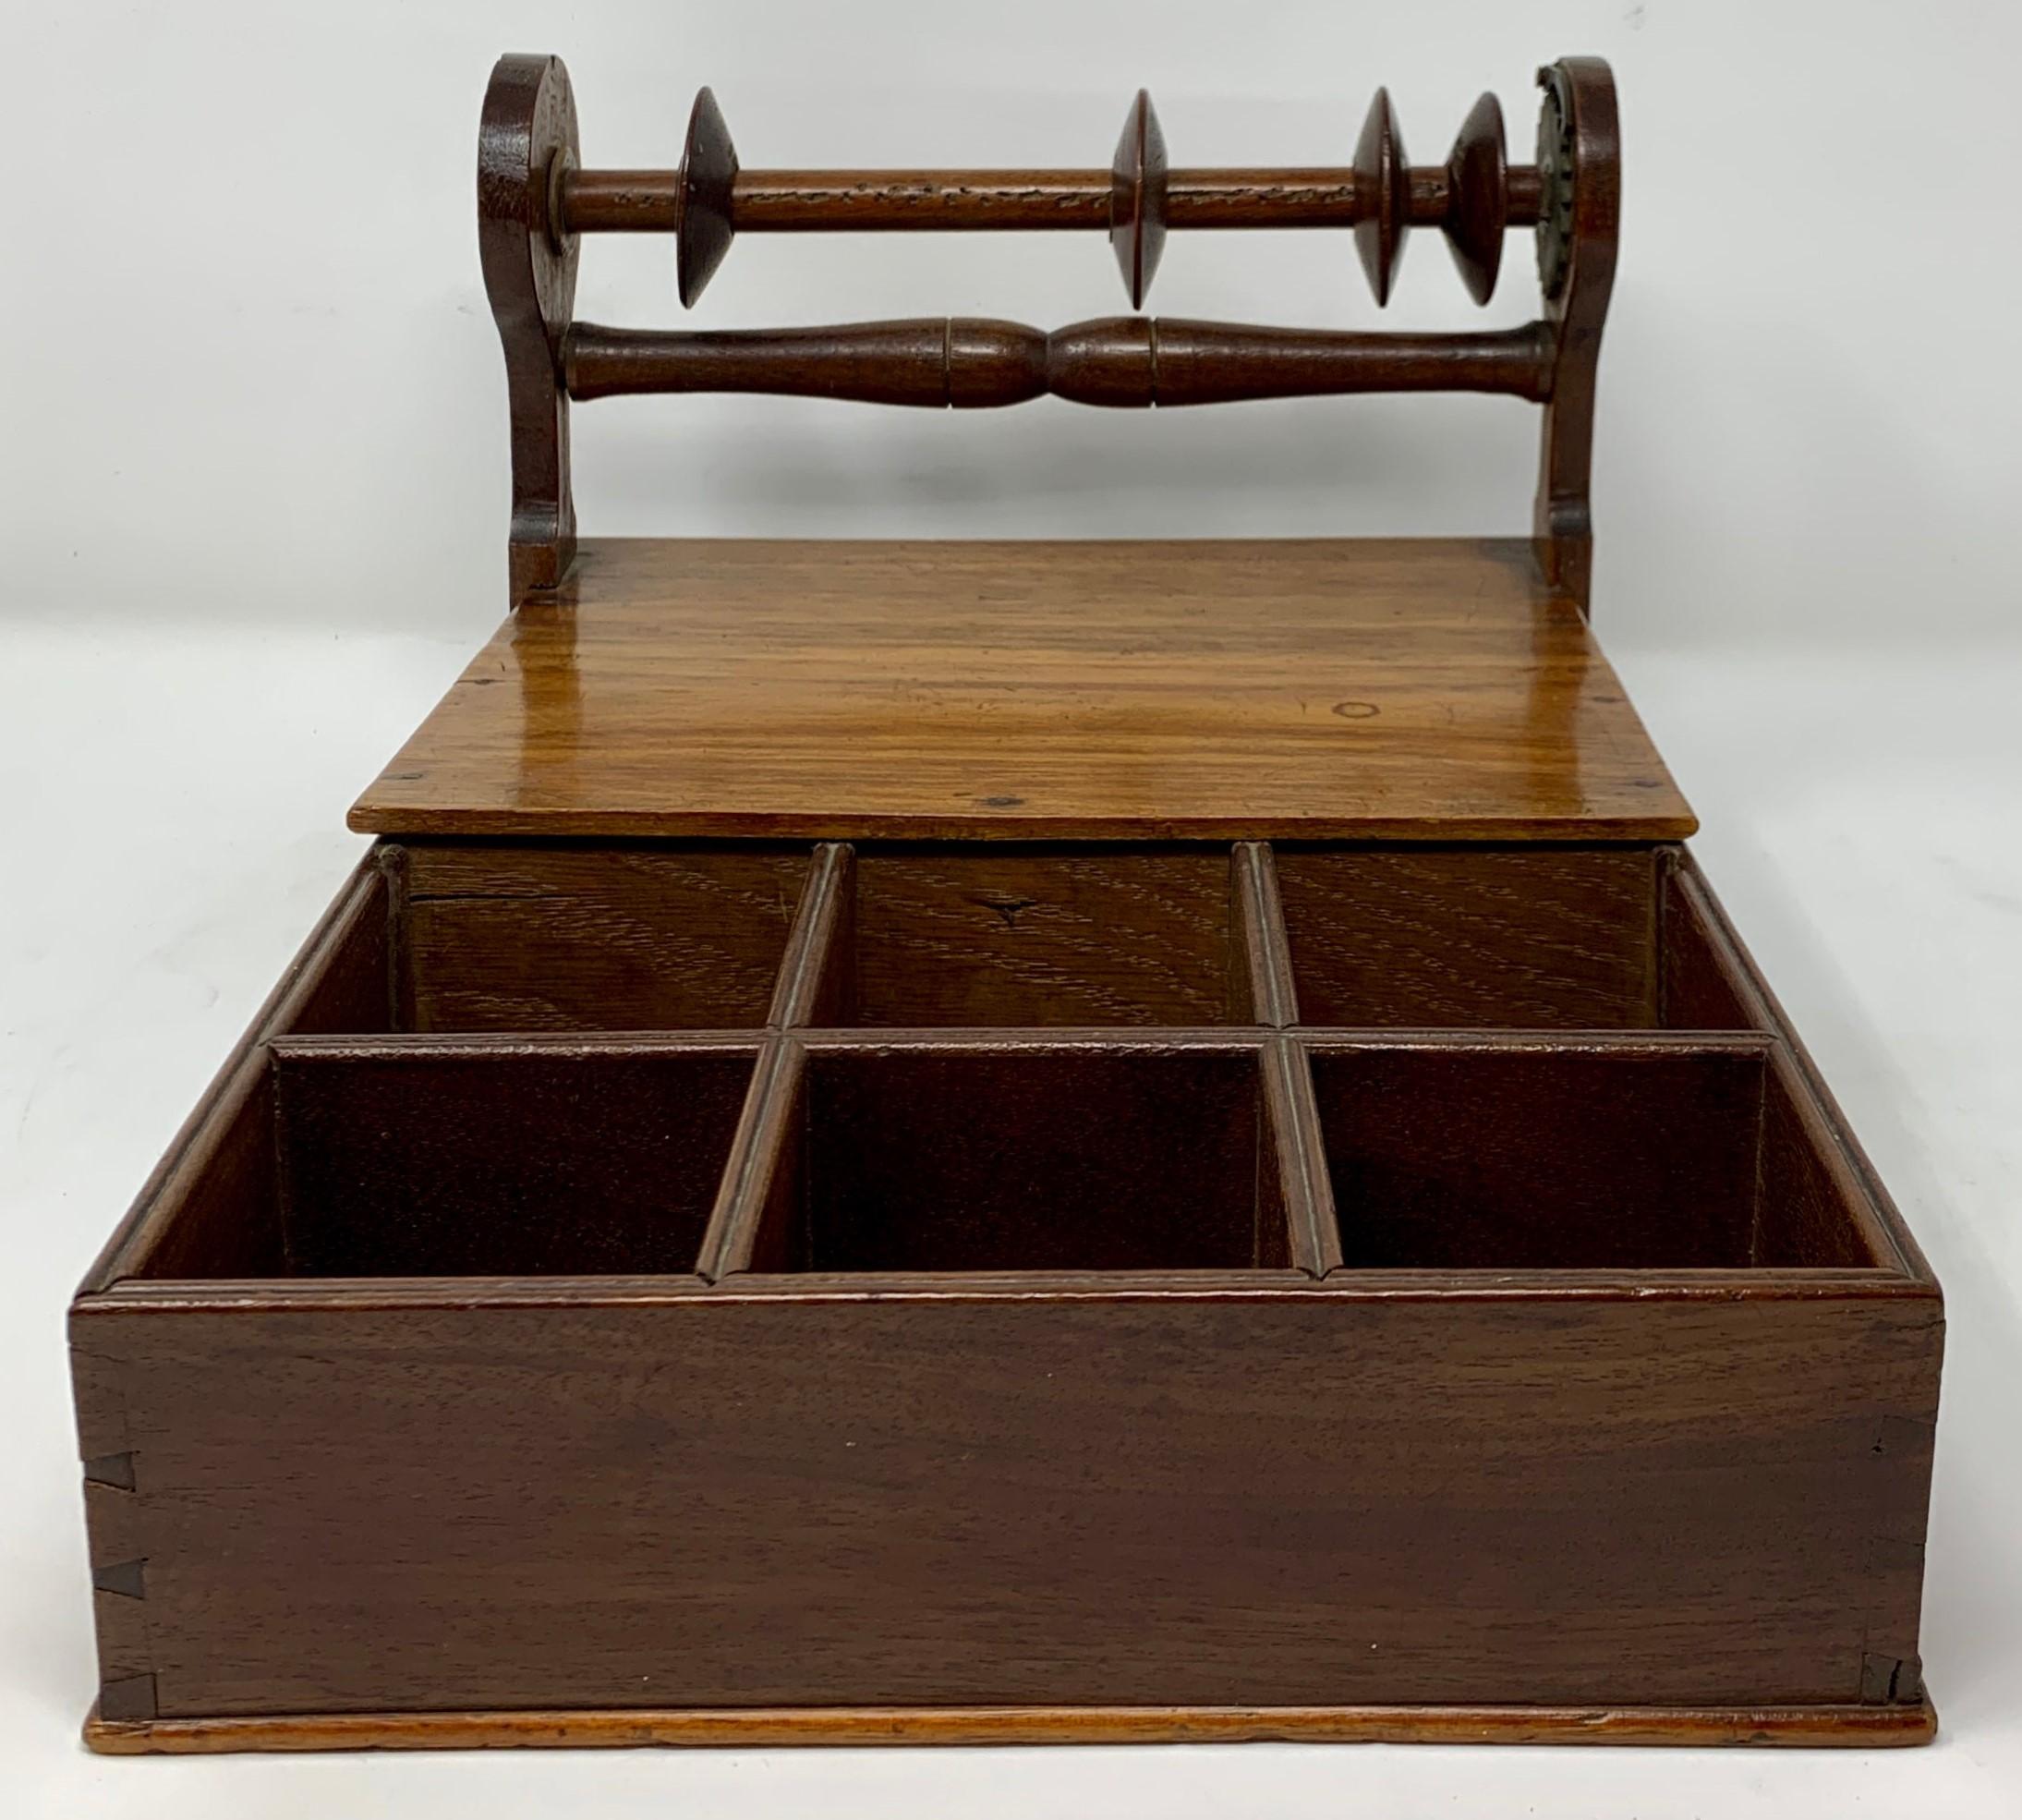 Antique English 18th century wool holder and thread sewing box. Just a little treasure that anyone interested in sewing, knitting or weaving would enjoy.
 